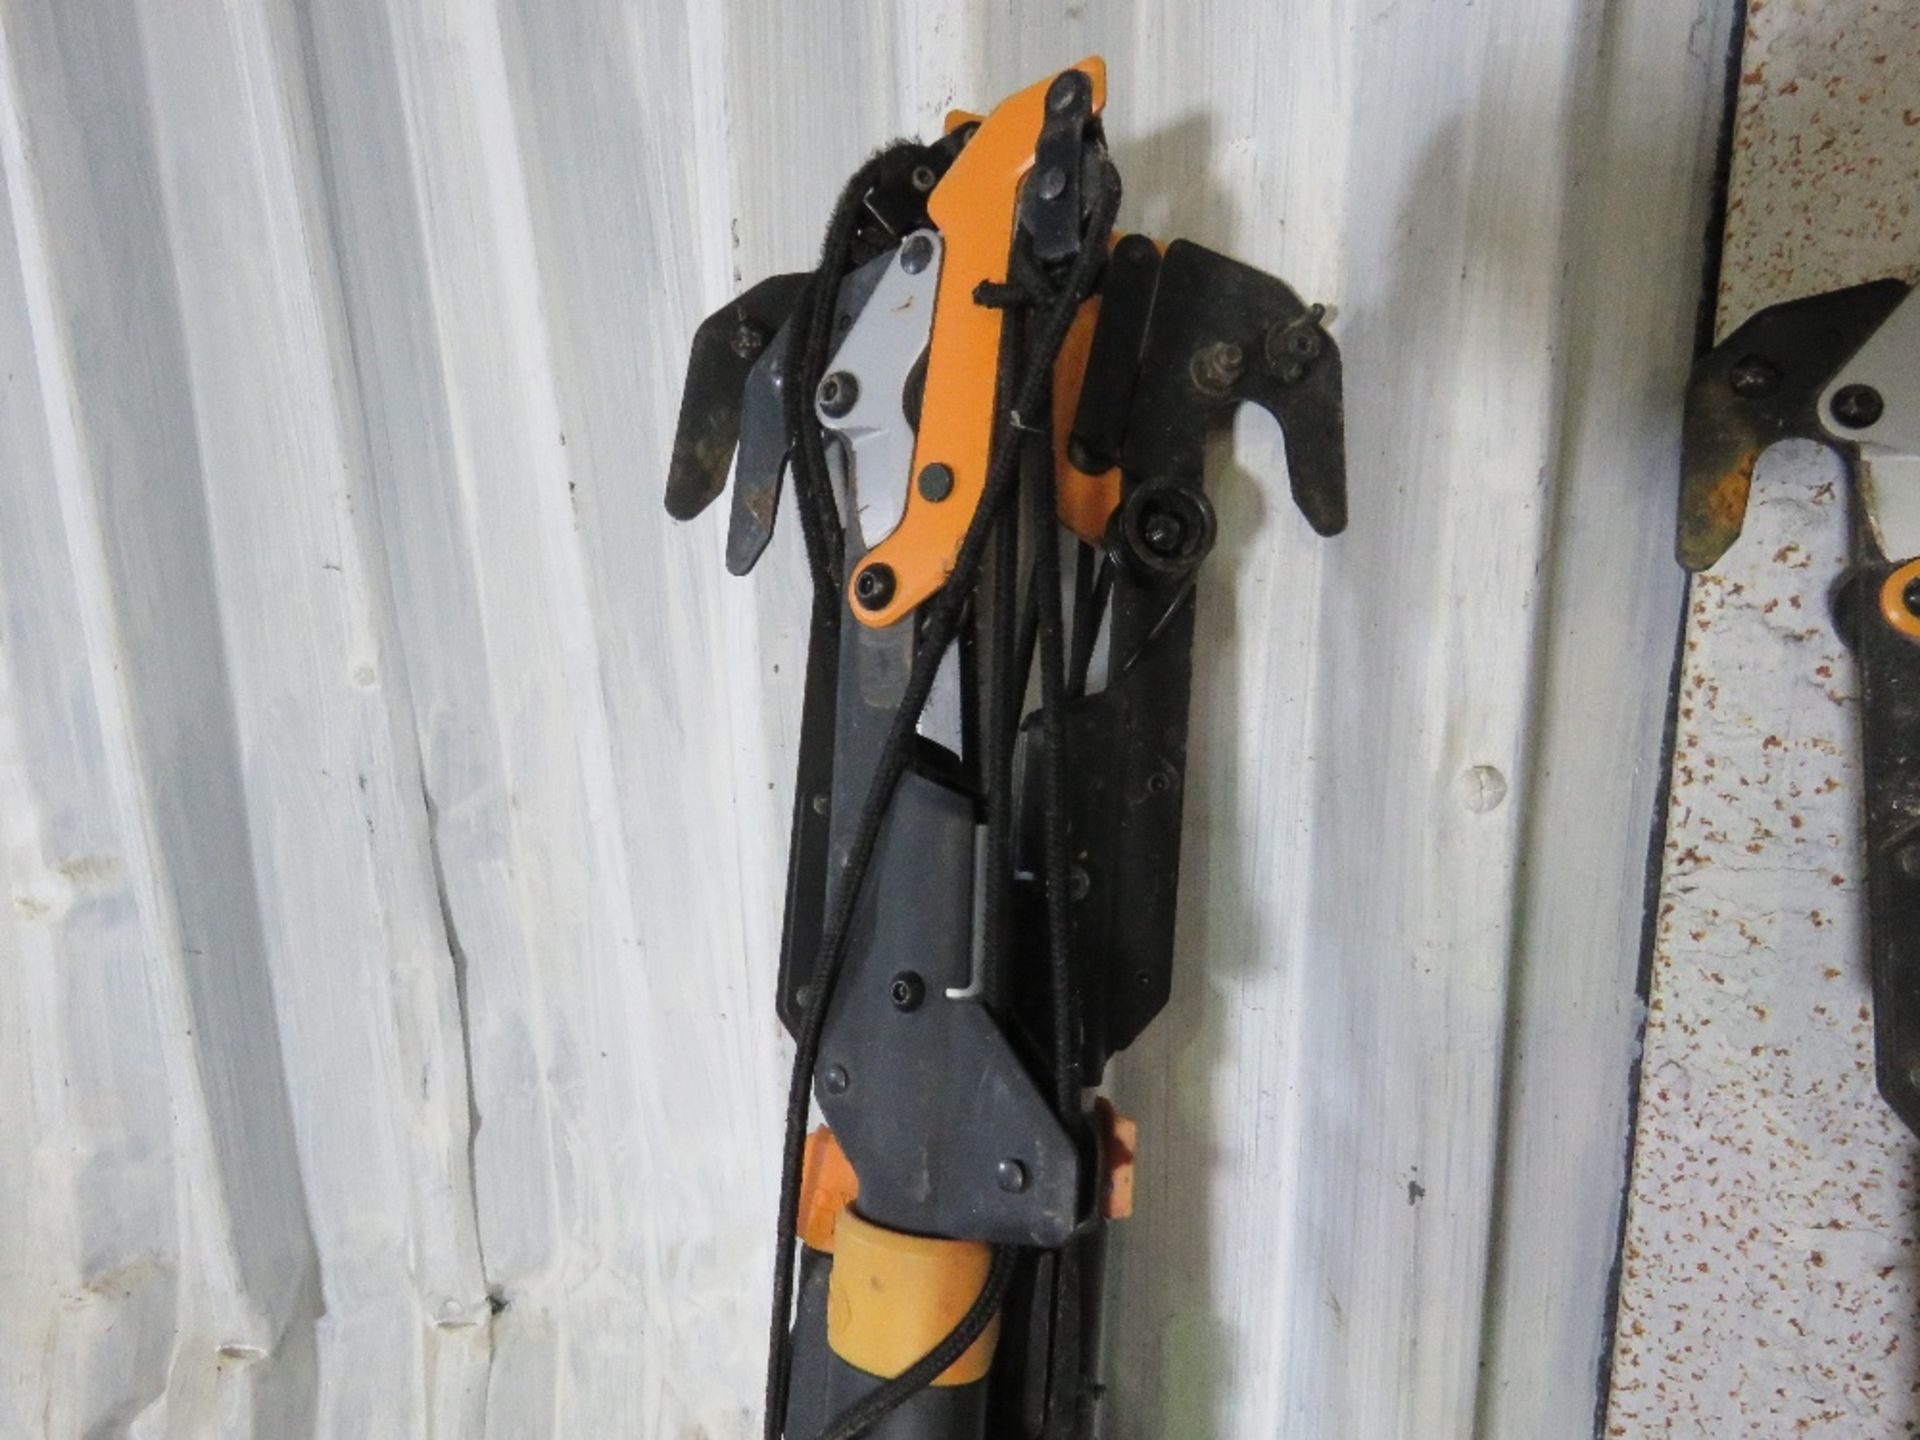 3 X FISKERS TELESCOPIC POLE PRUNERS, GRP , PROFESSIONAL TYPE. NO VAT ON HAMMER PRICE. - Image 2 of 2